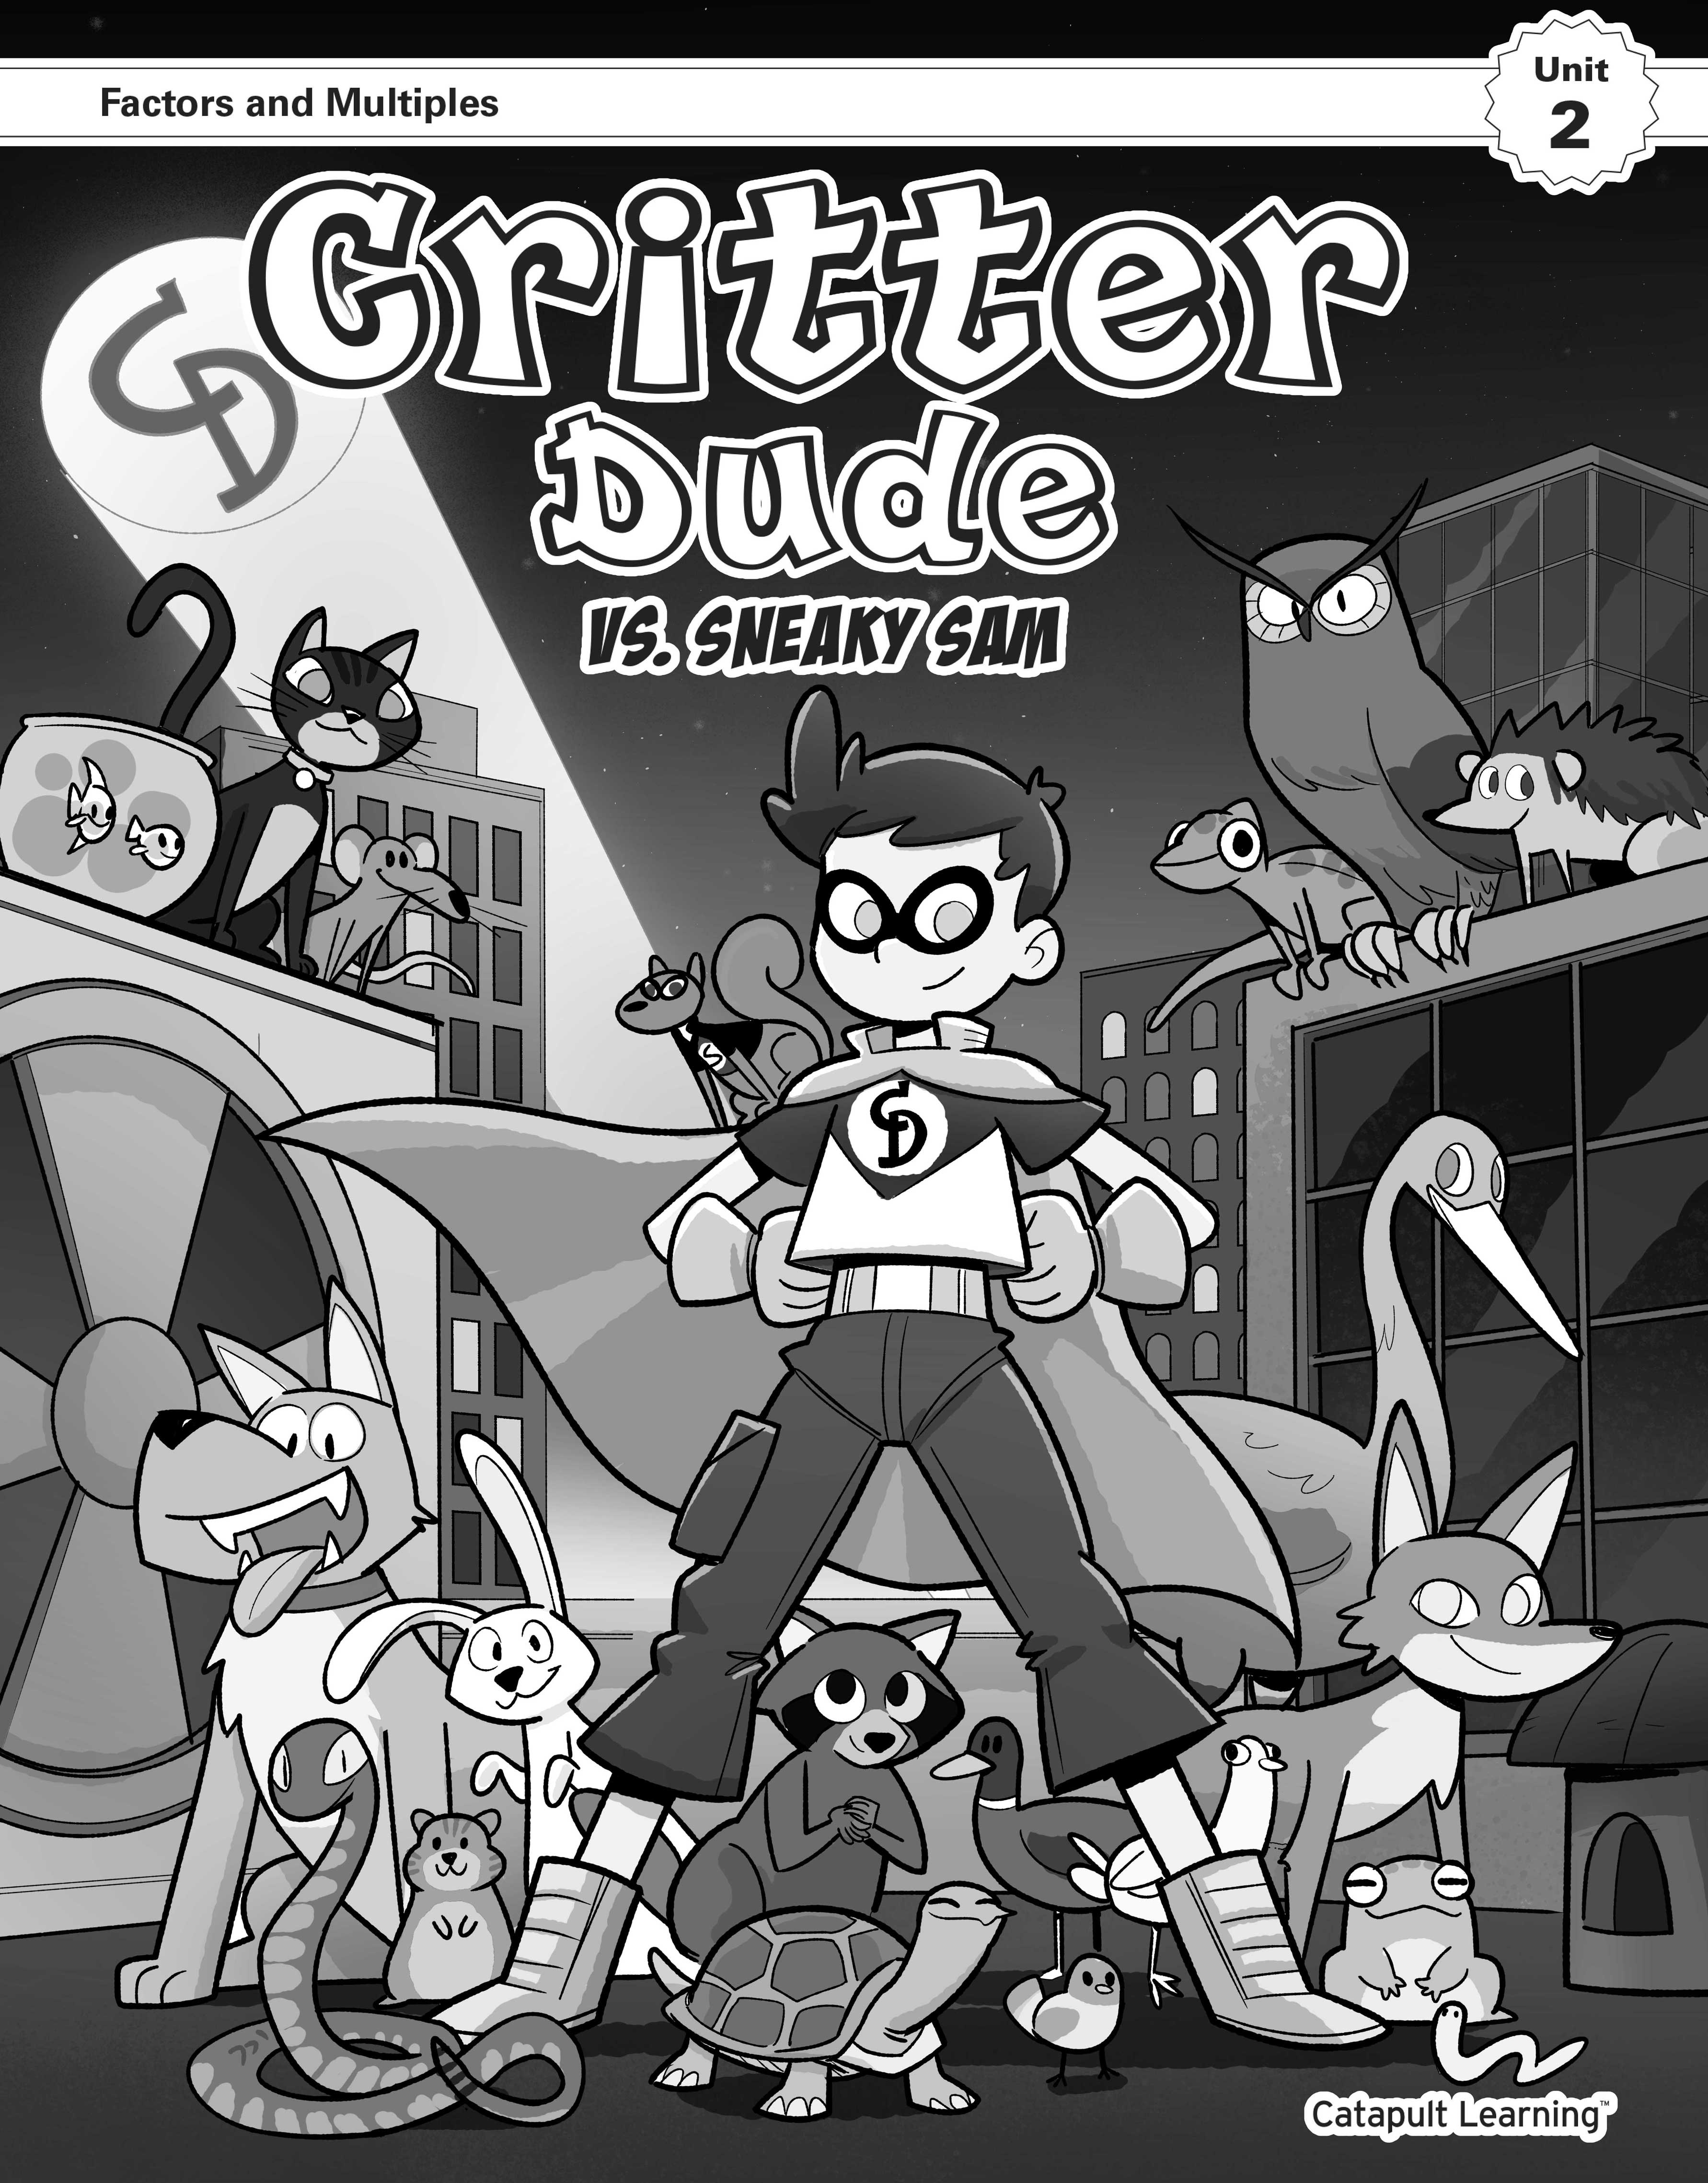 Critter-Dude-cover